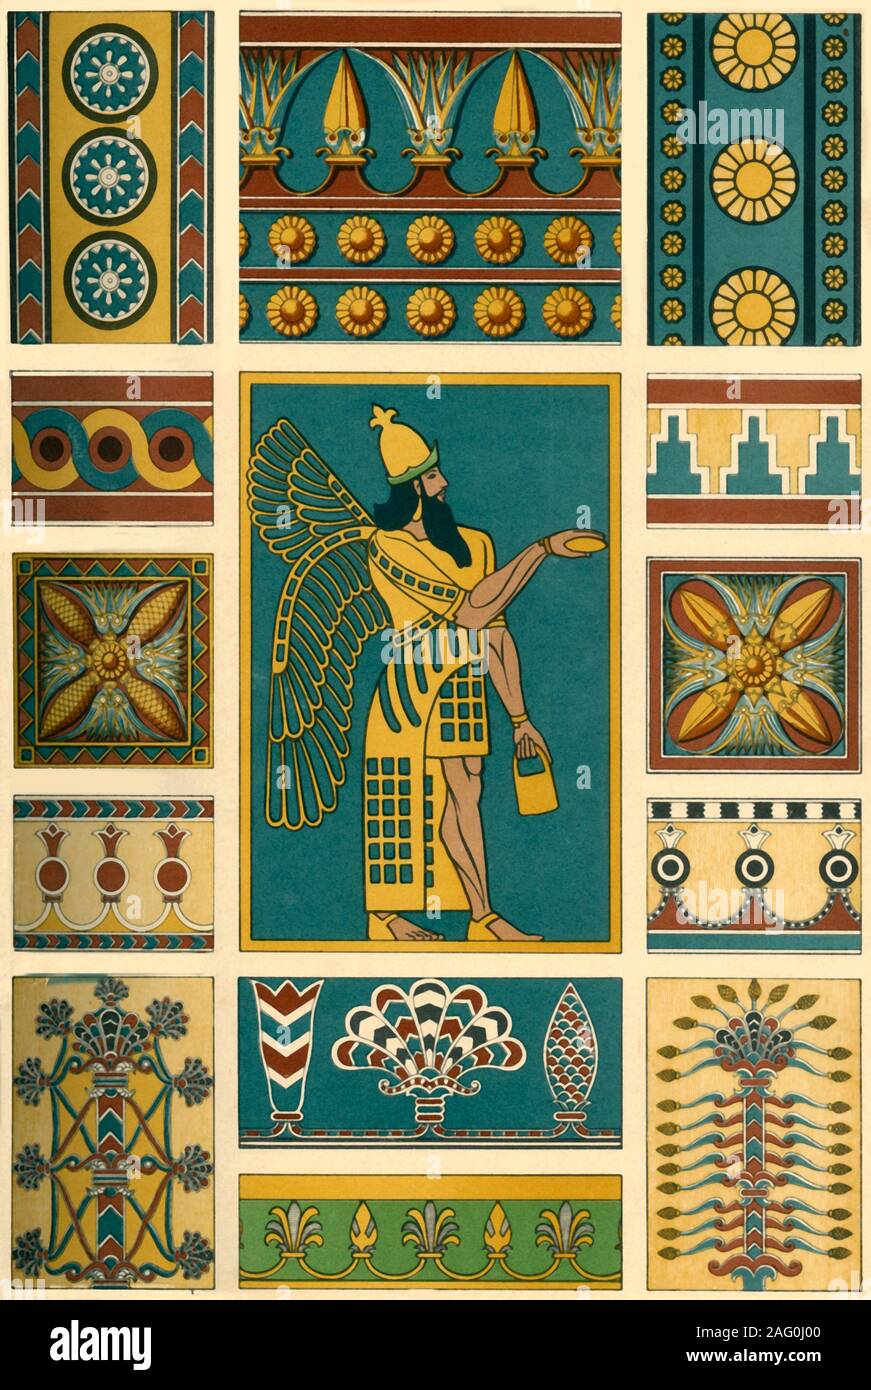 Assyrian decoration, (1898). Examples of ancient Assyrian painting, polychrome sculpture and pottery from what is now Iraq: 'Fig 1: Portion of a glazed brick from a palace at Khorsabad. Figs 2-4: Painted bas-reliefs from Koyunjik [Kuyunjik, Nineveh]. Fig 5: Painted ornament from Nimroud [Nimrud]. Fig 6: Glazed brick from Khorsabad. Figs 7-10: Painted ornaments from Nimroud. Figs 11-12: Sacred trees. Painted bas-reliefs from Nimroud. Fig 13: Painted ornament from Nimroud. Fig 14: Enamelled brick from Khorsabad...The excavations on the banks of the Tigris at Khorsabad, Nimroud and Koyunjik broug Stock Photo